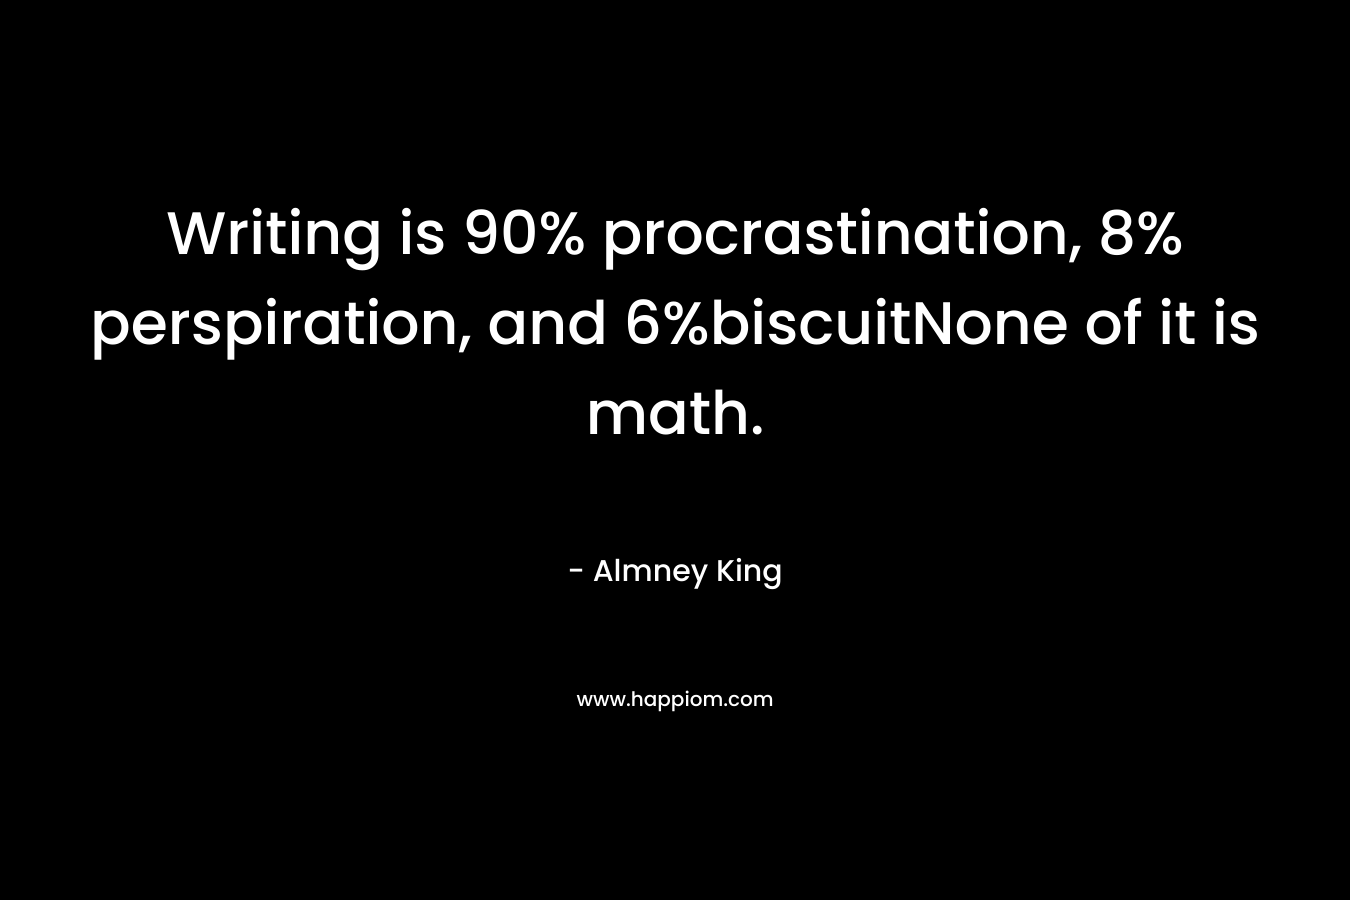 Writing is 90% procrastination, 8% perspiration, and 6%biscuitNone of it is math.